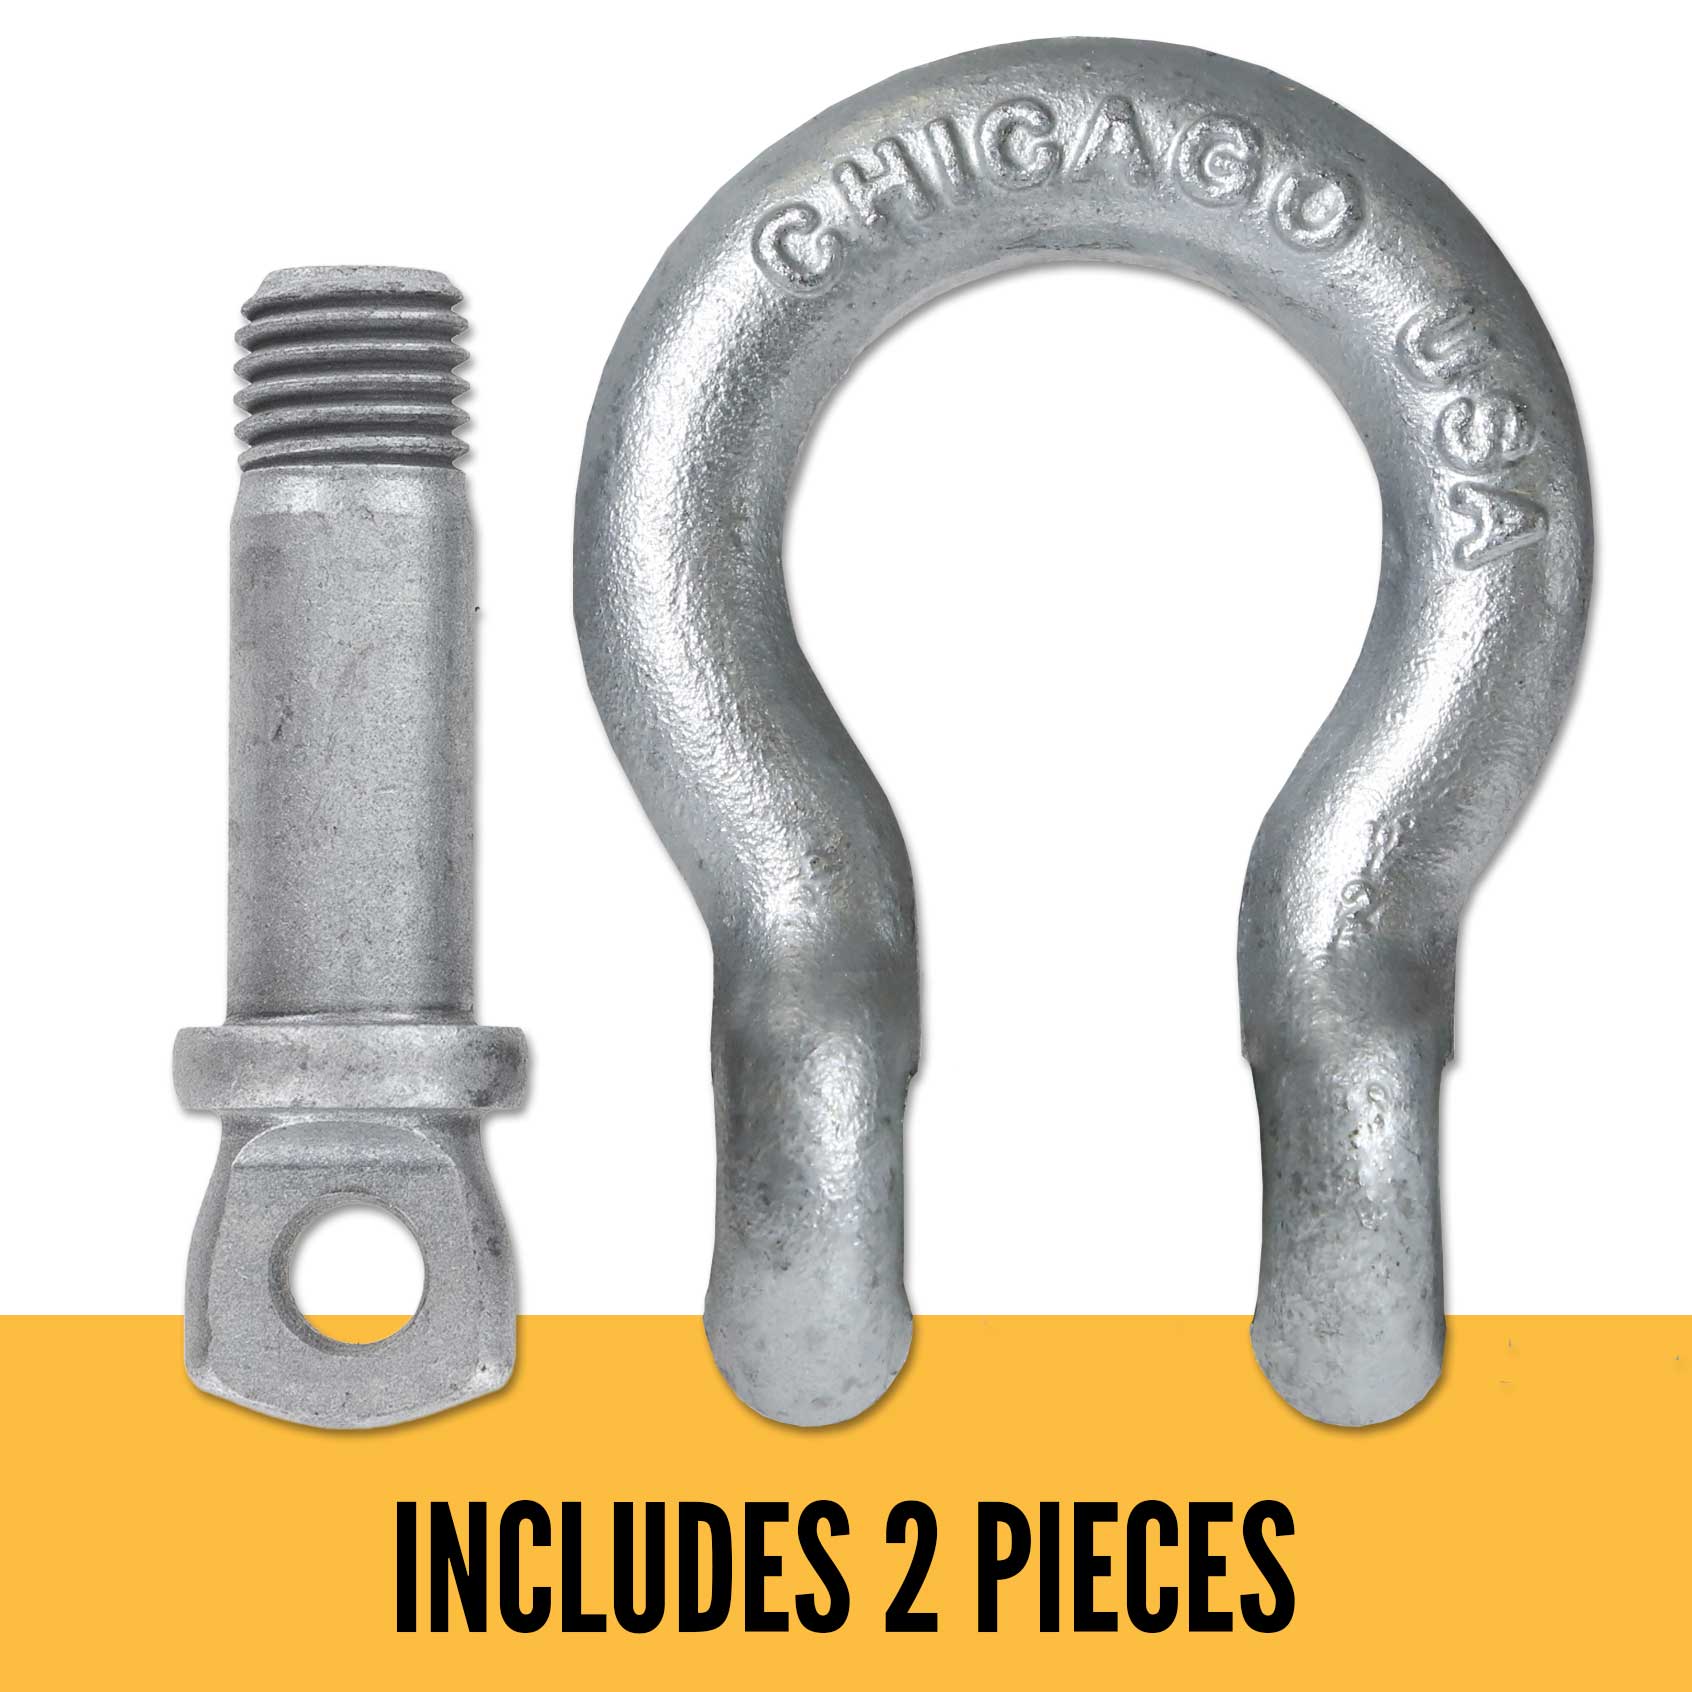 Screw Pin Anchor Shackle - Chicago Hardware - 1" Galvanized Steel - 8.5 Ton parts of a shackle